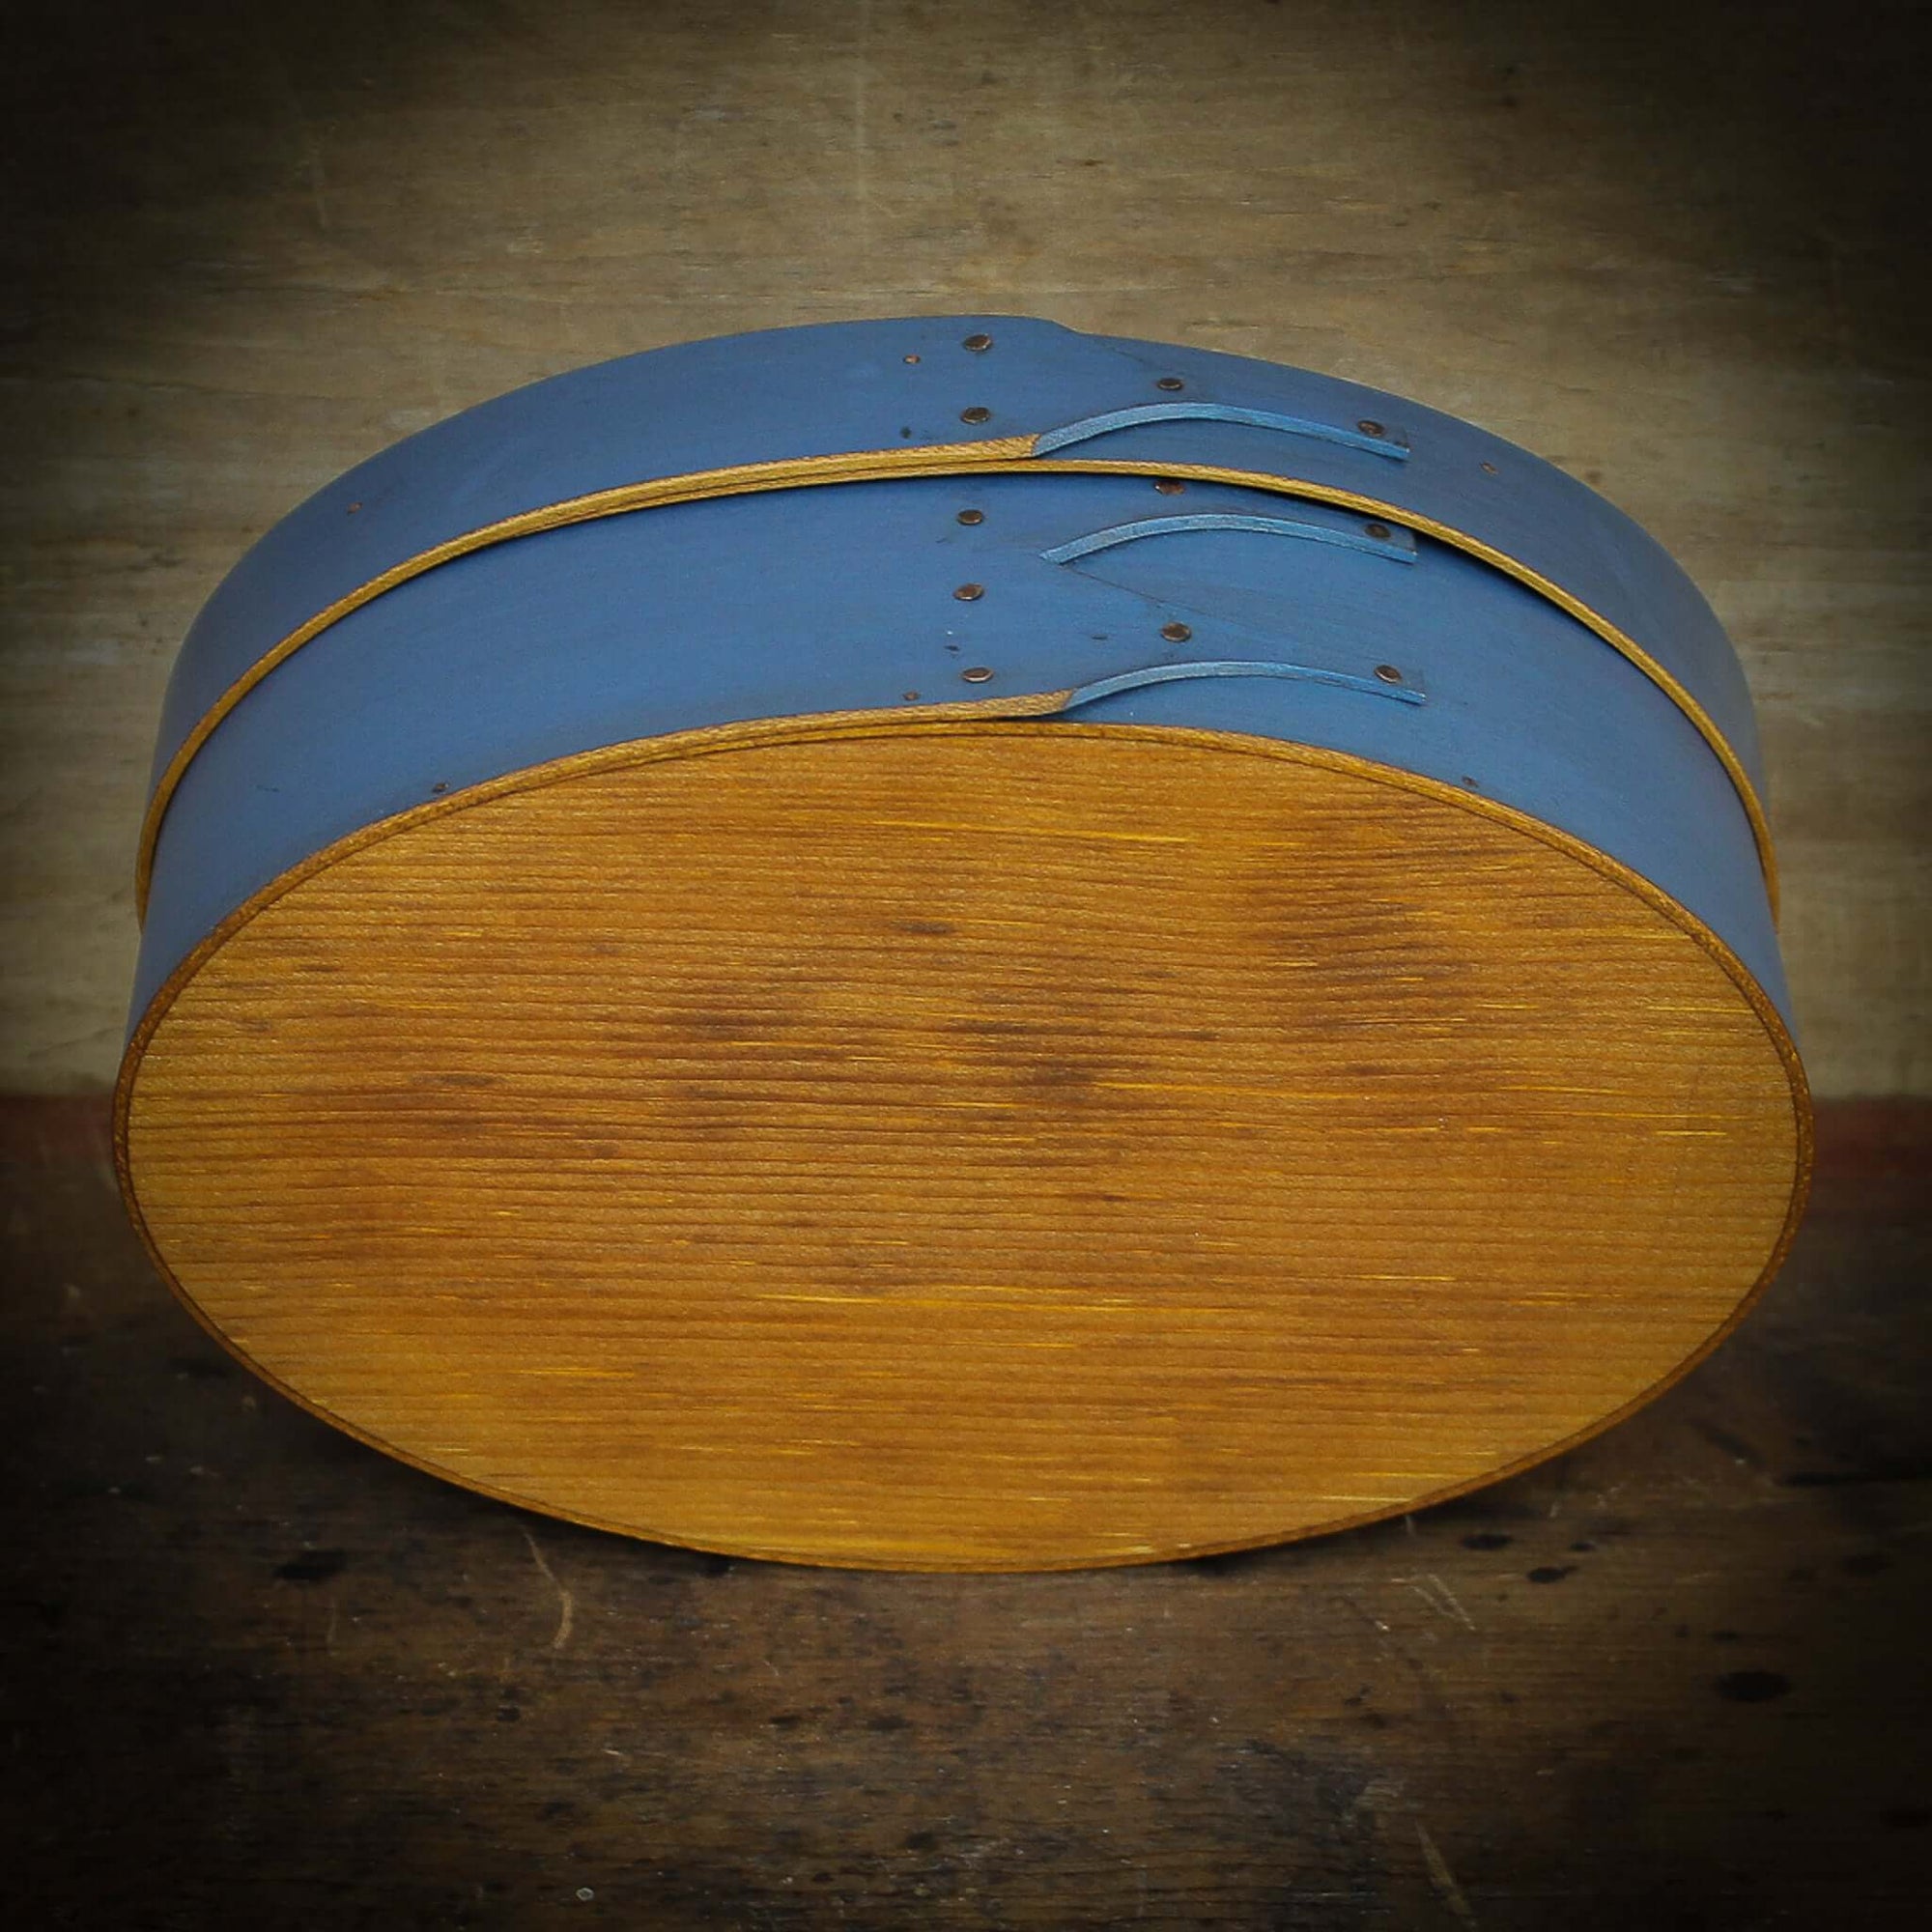 Shaker Style Recessed Lid Box, LeHay's Shaker Boxes